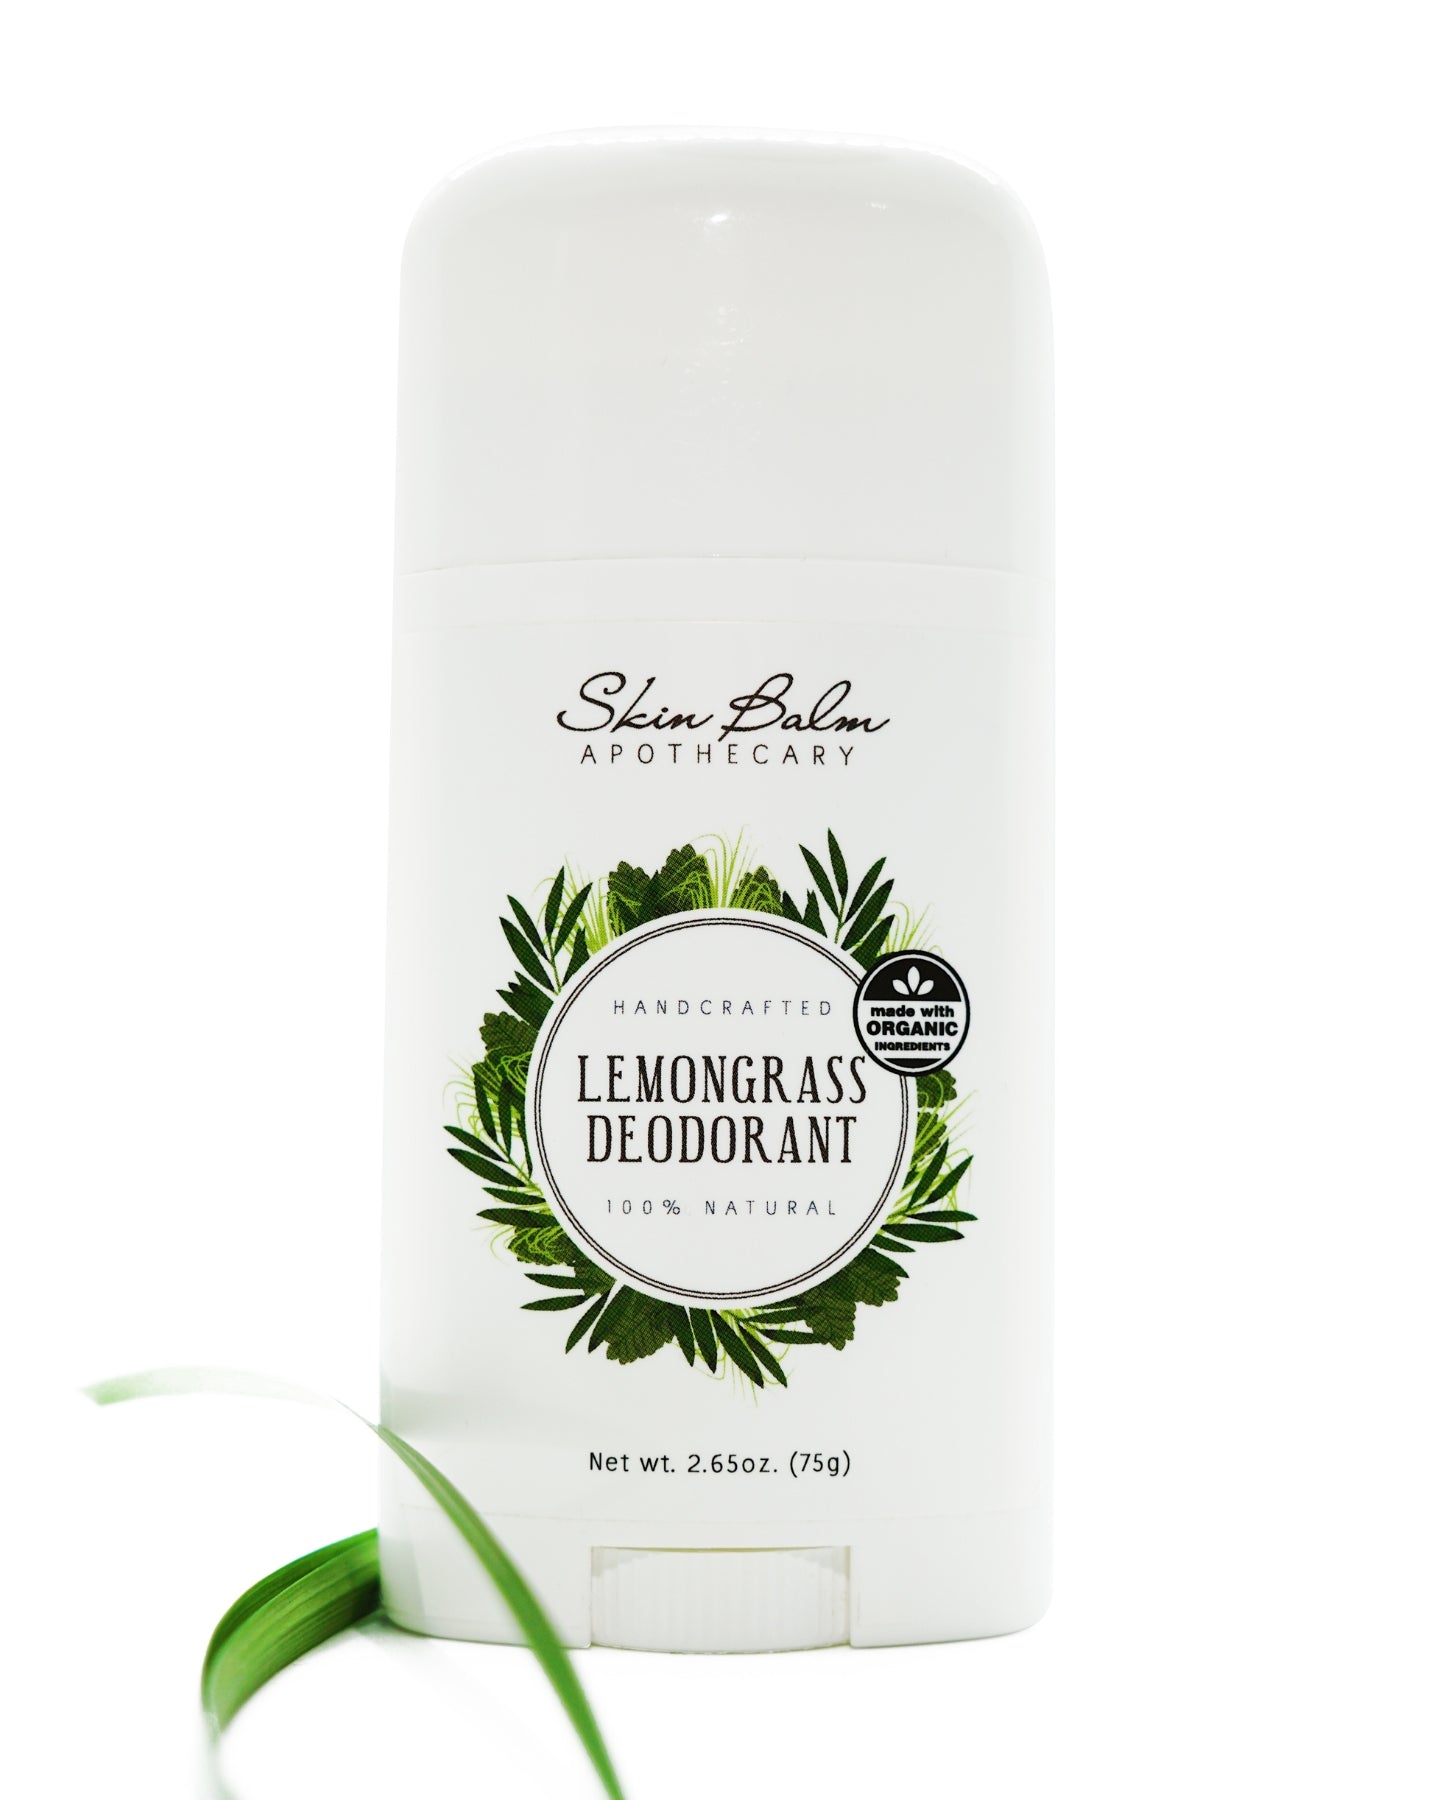 Lemongrass Deodorant with green foliage against a white background.